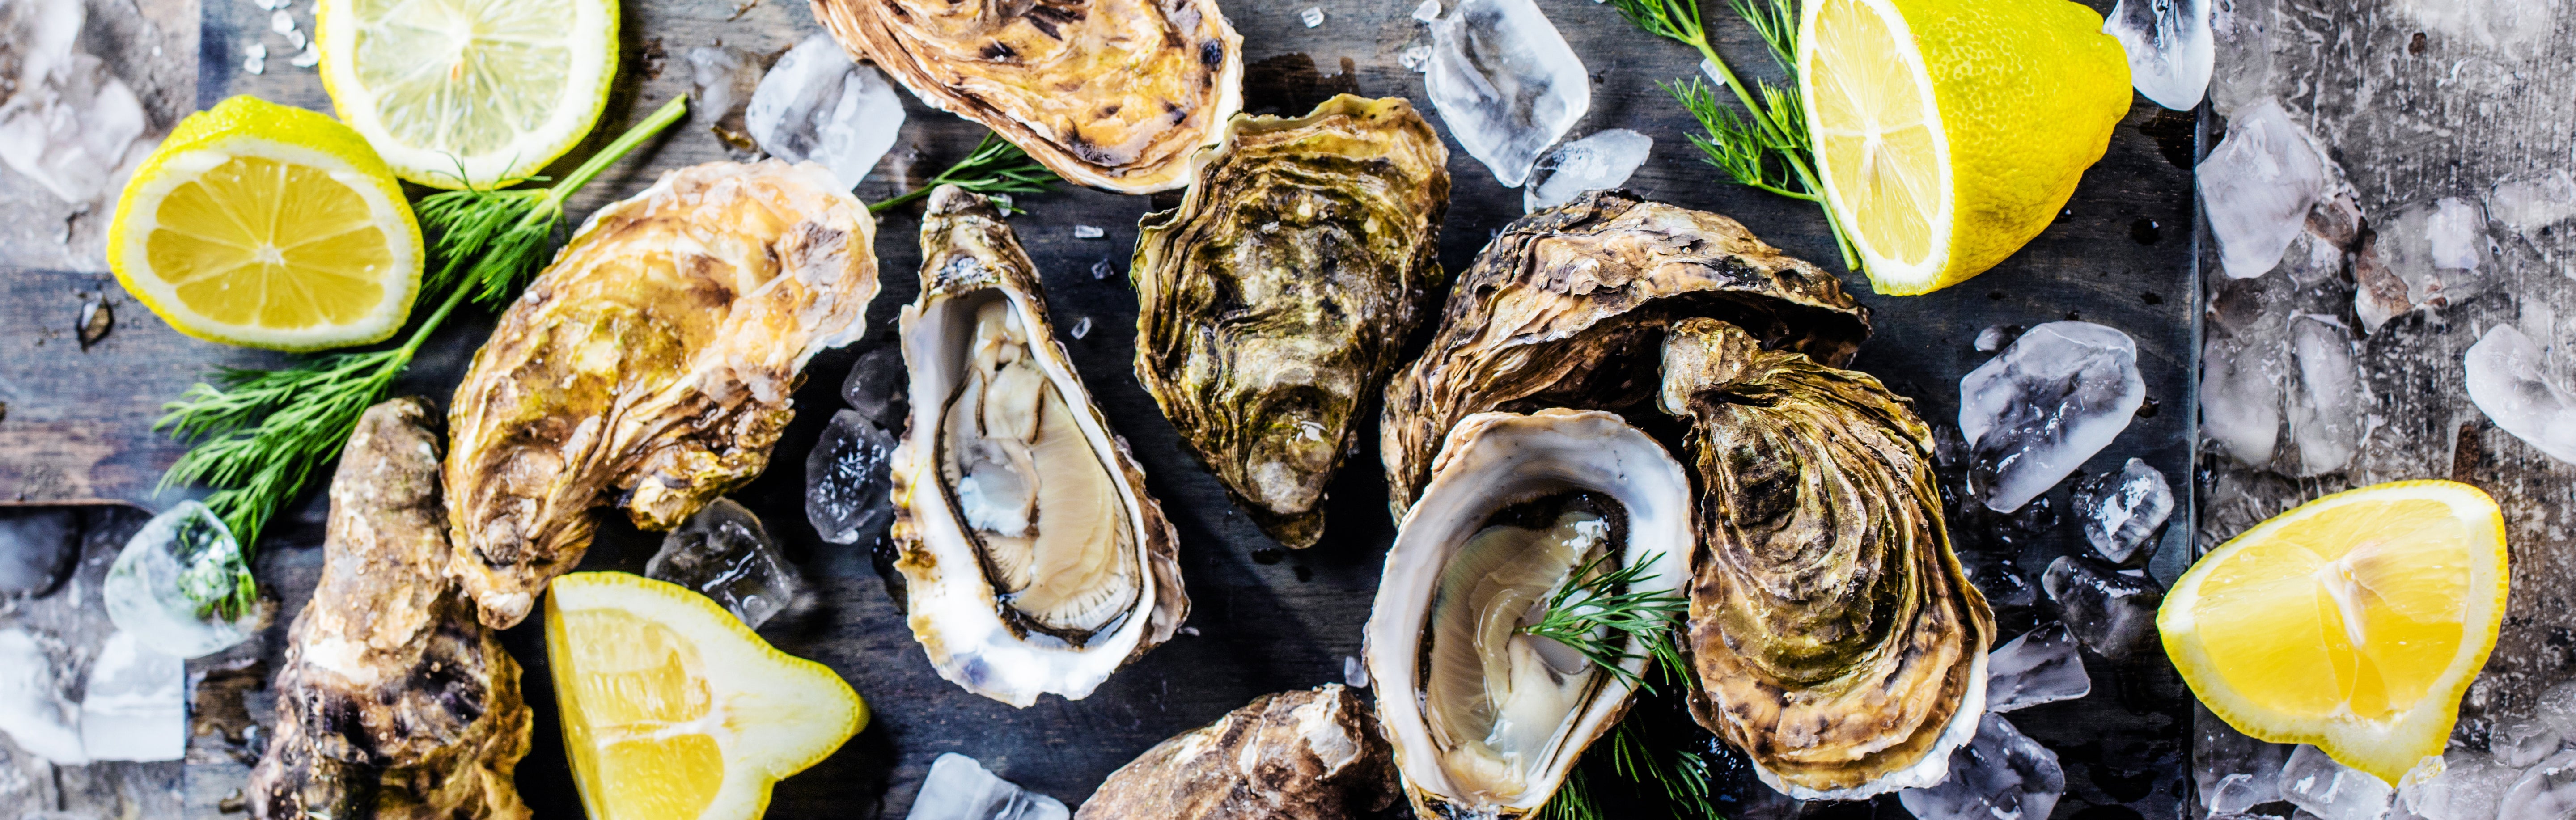 Oysters and lemon on a bed of ice, with an oyster shucking knife and two glasses of white wine.